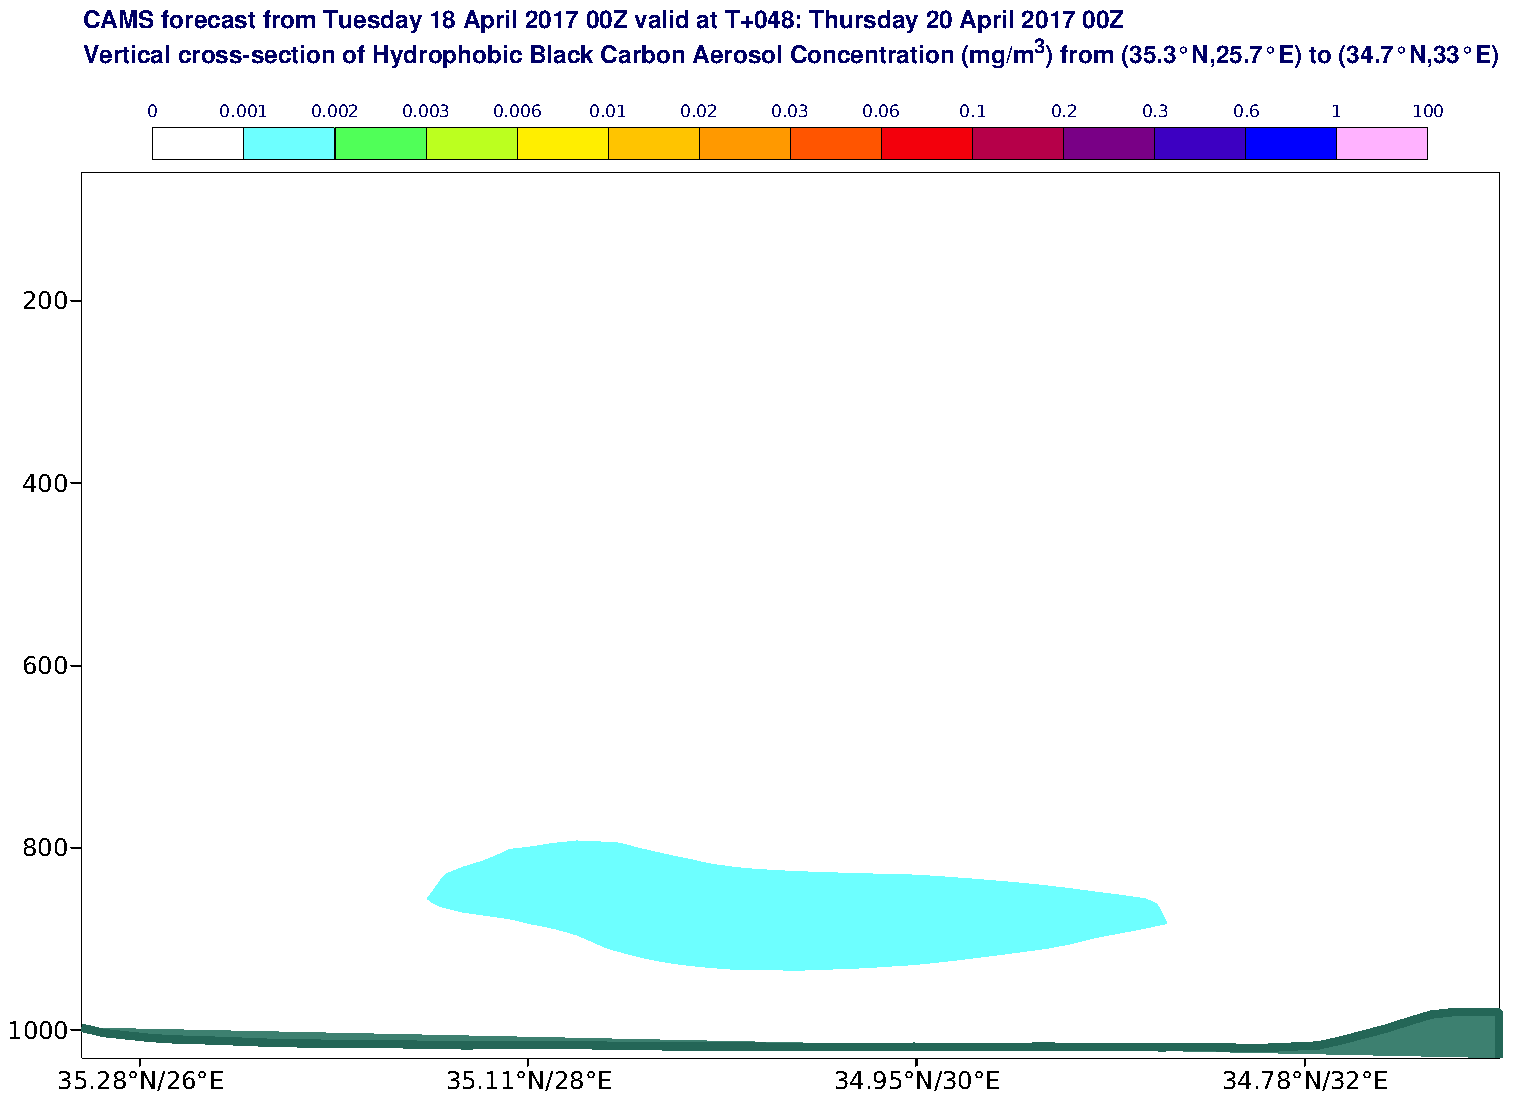 Vertical cross-section of Hydrophobic Black Carbon Aerosol Concentration (mg/m3) valid at T48 - 2017-04-20 00:00